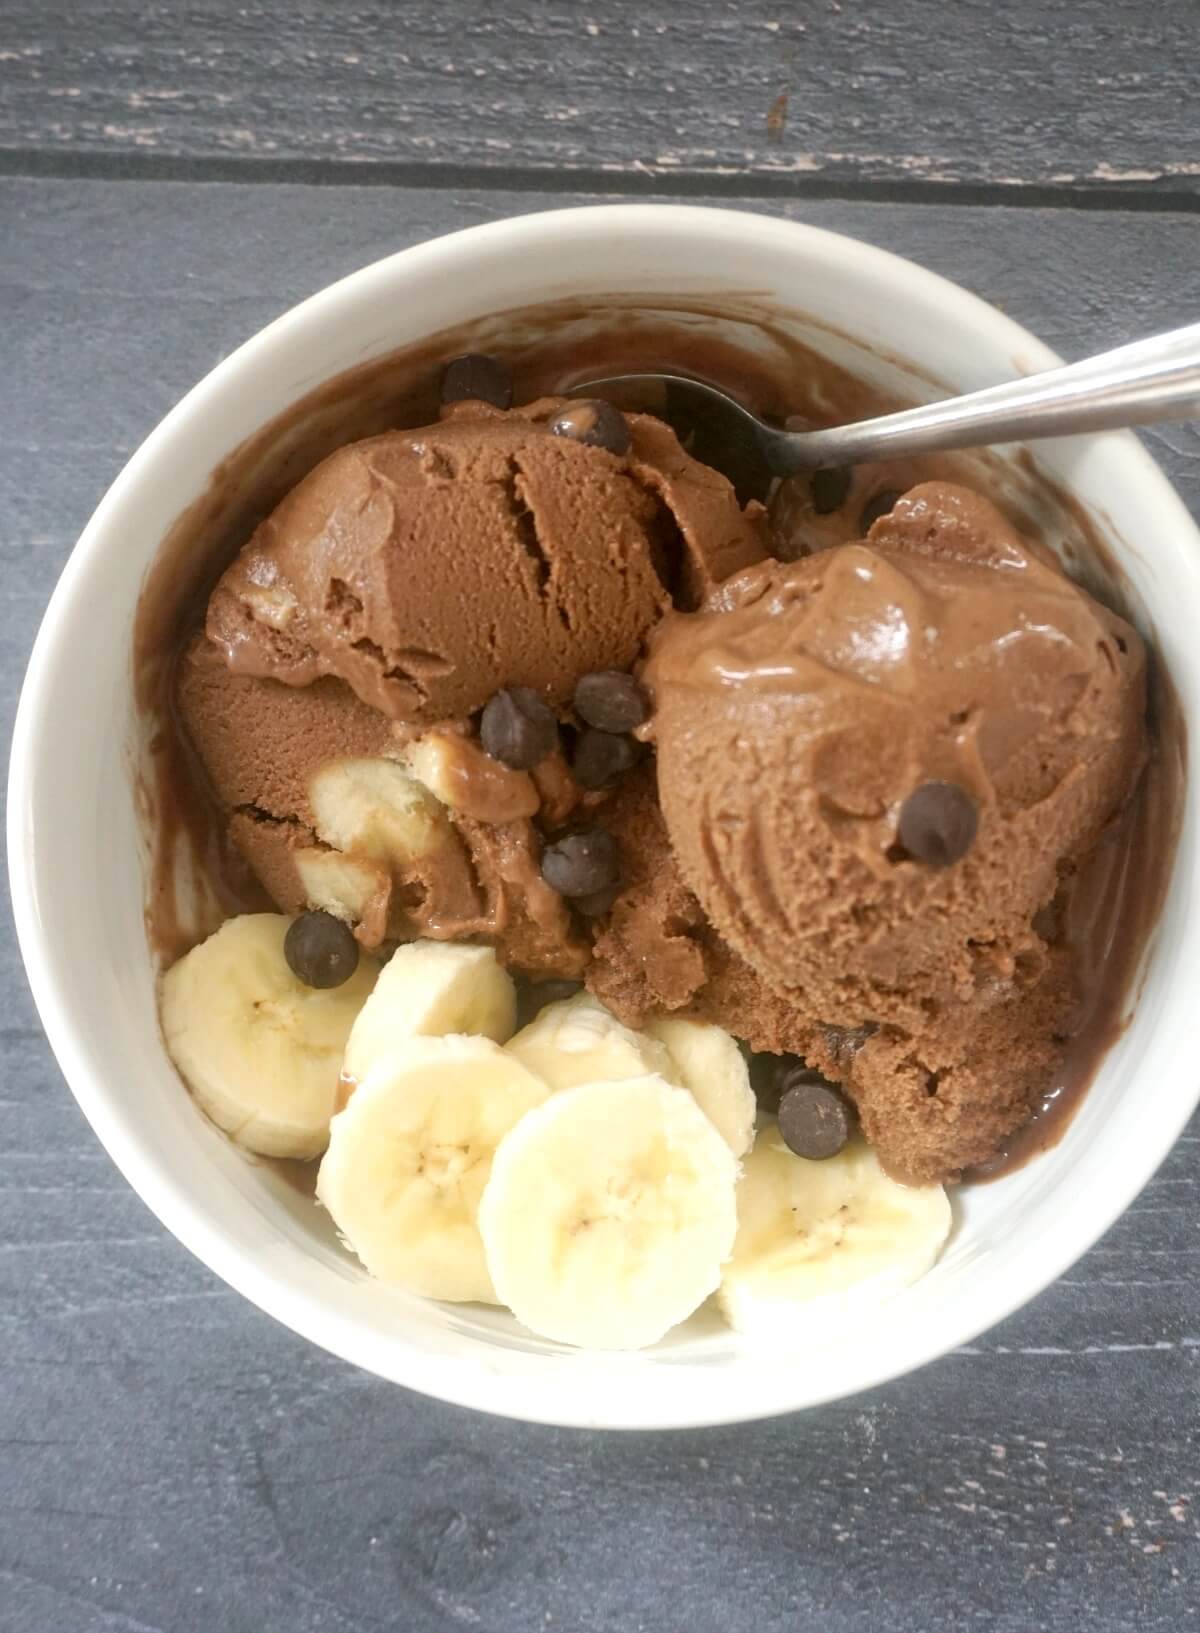 Overhead shoot of a white bowl with ice cream, slices of bananas and chocolate chips